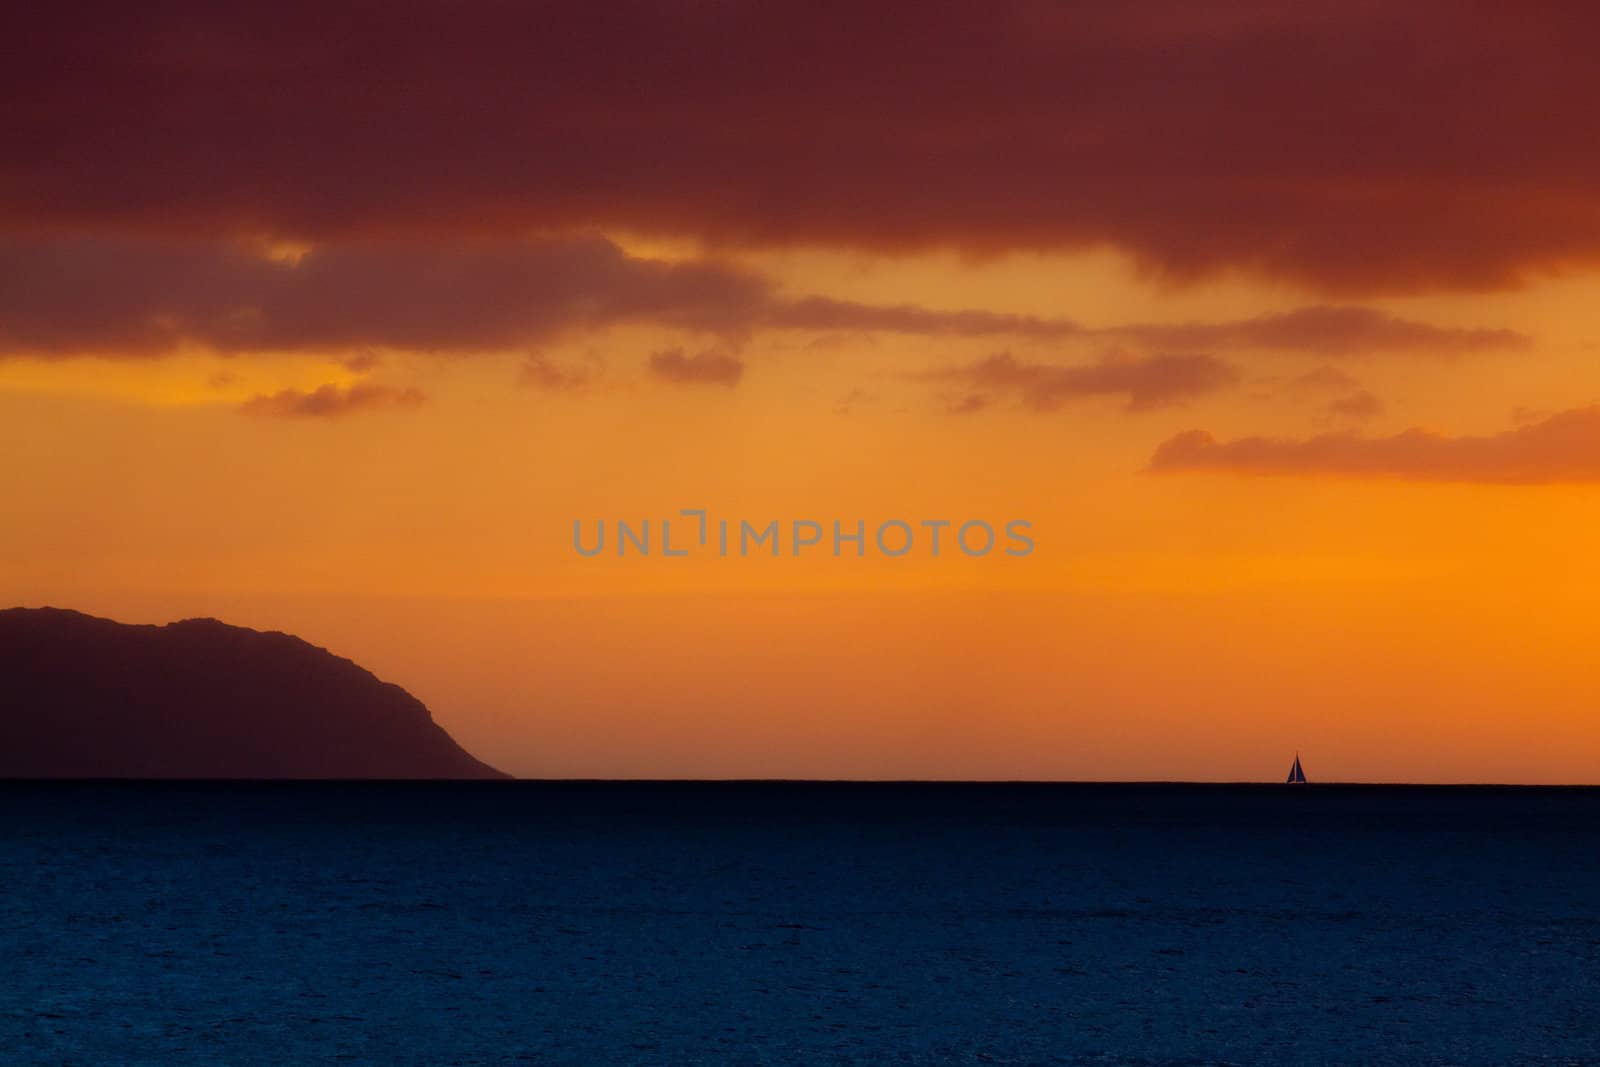 A sailboat sails offshore during a sunset in Oahu Hawaii along the north shore.